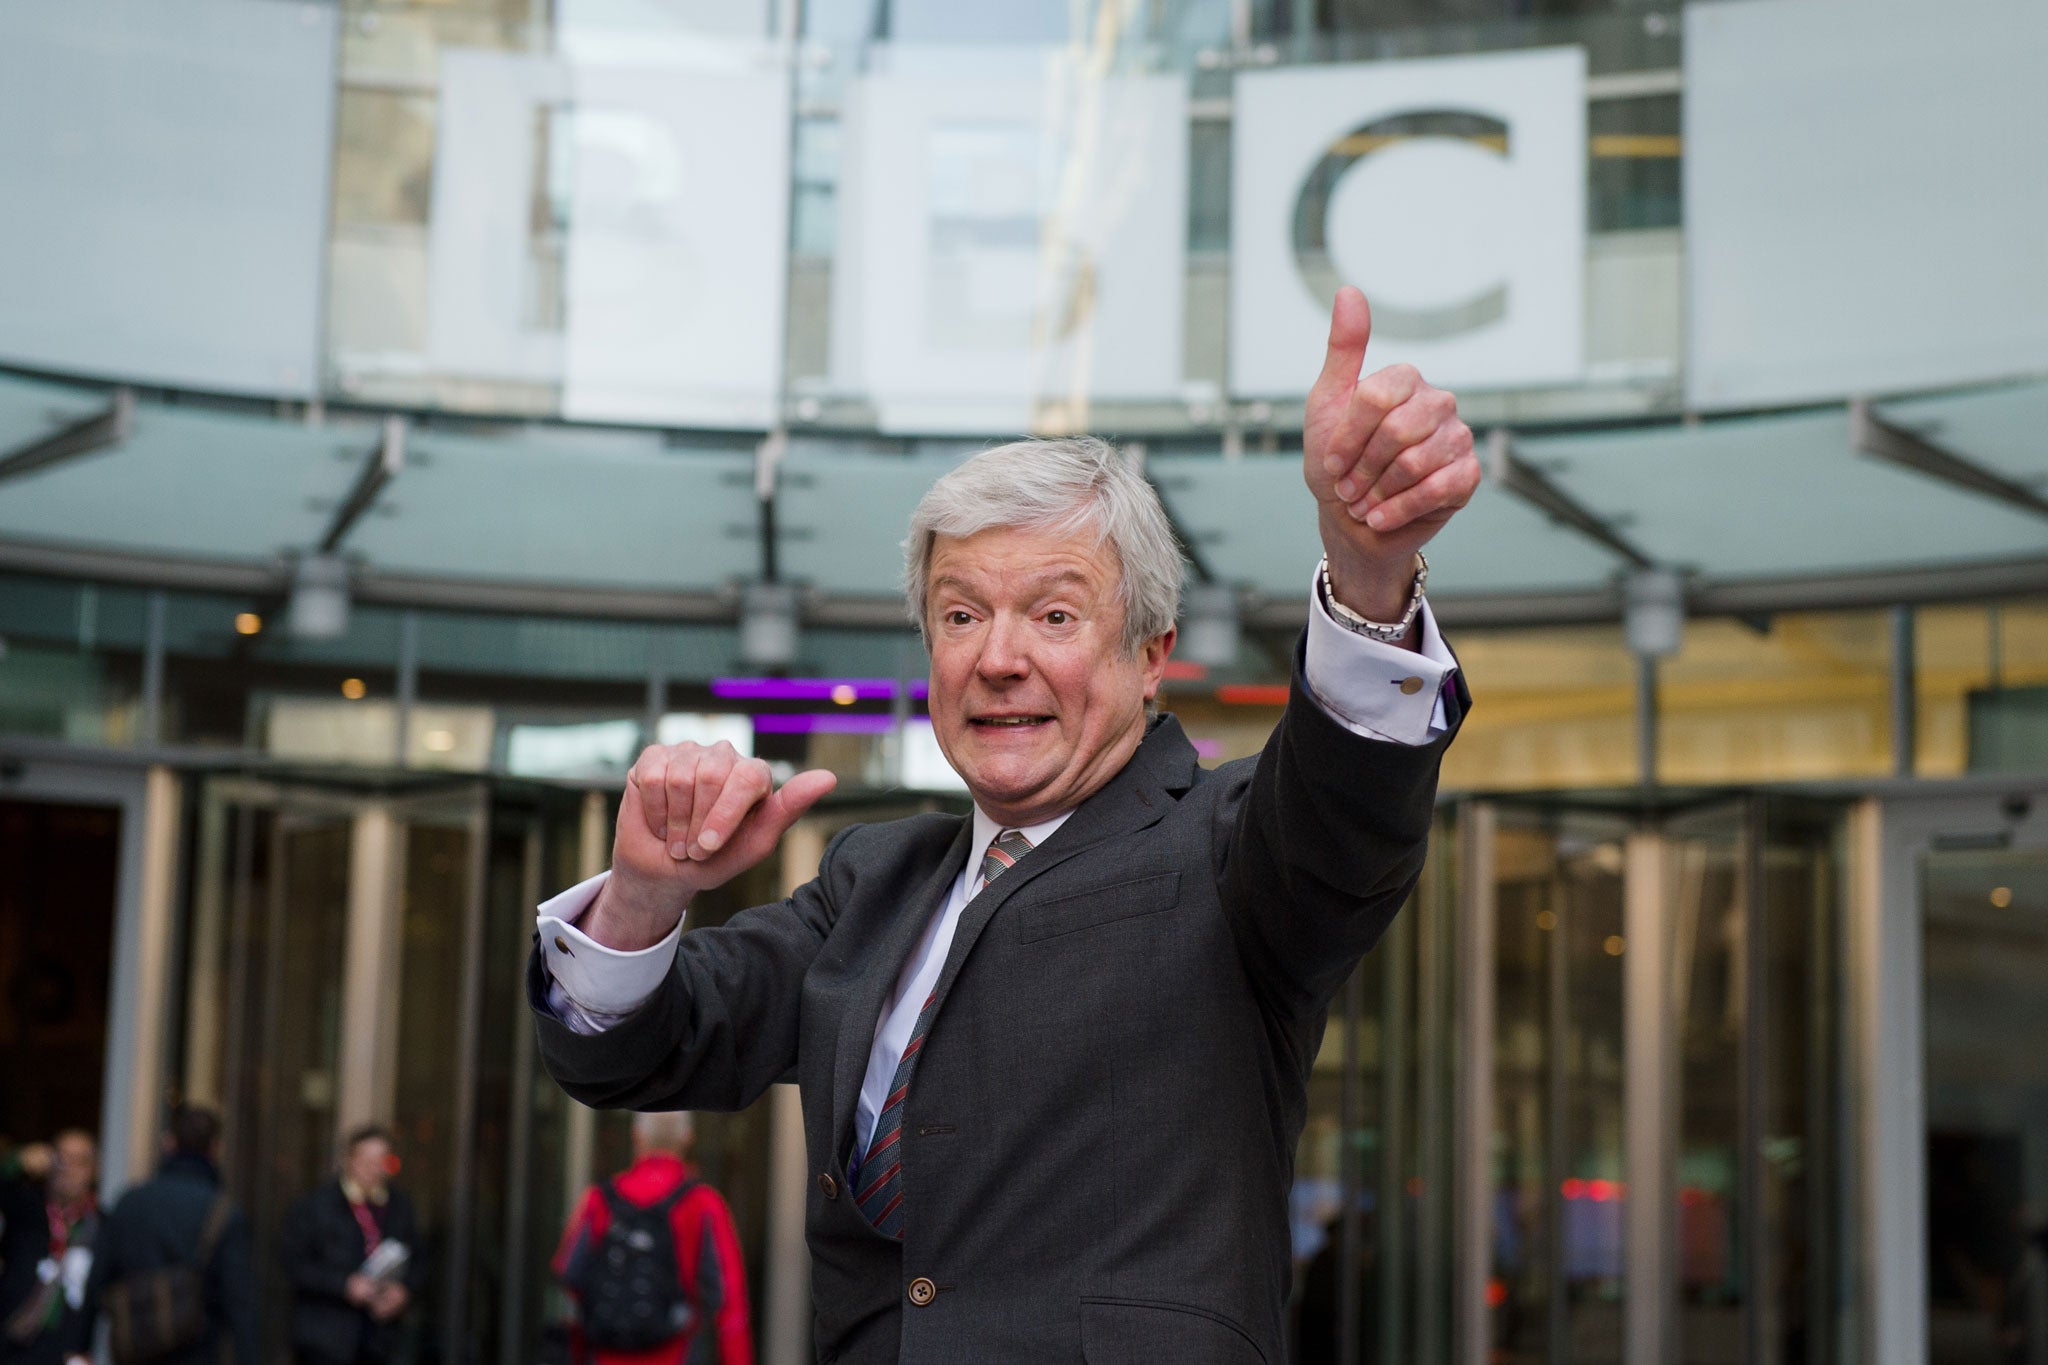 Tony Hall gestures outside the BBC as he arrives for his first day of work